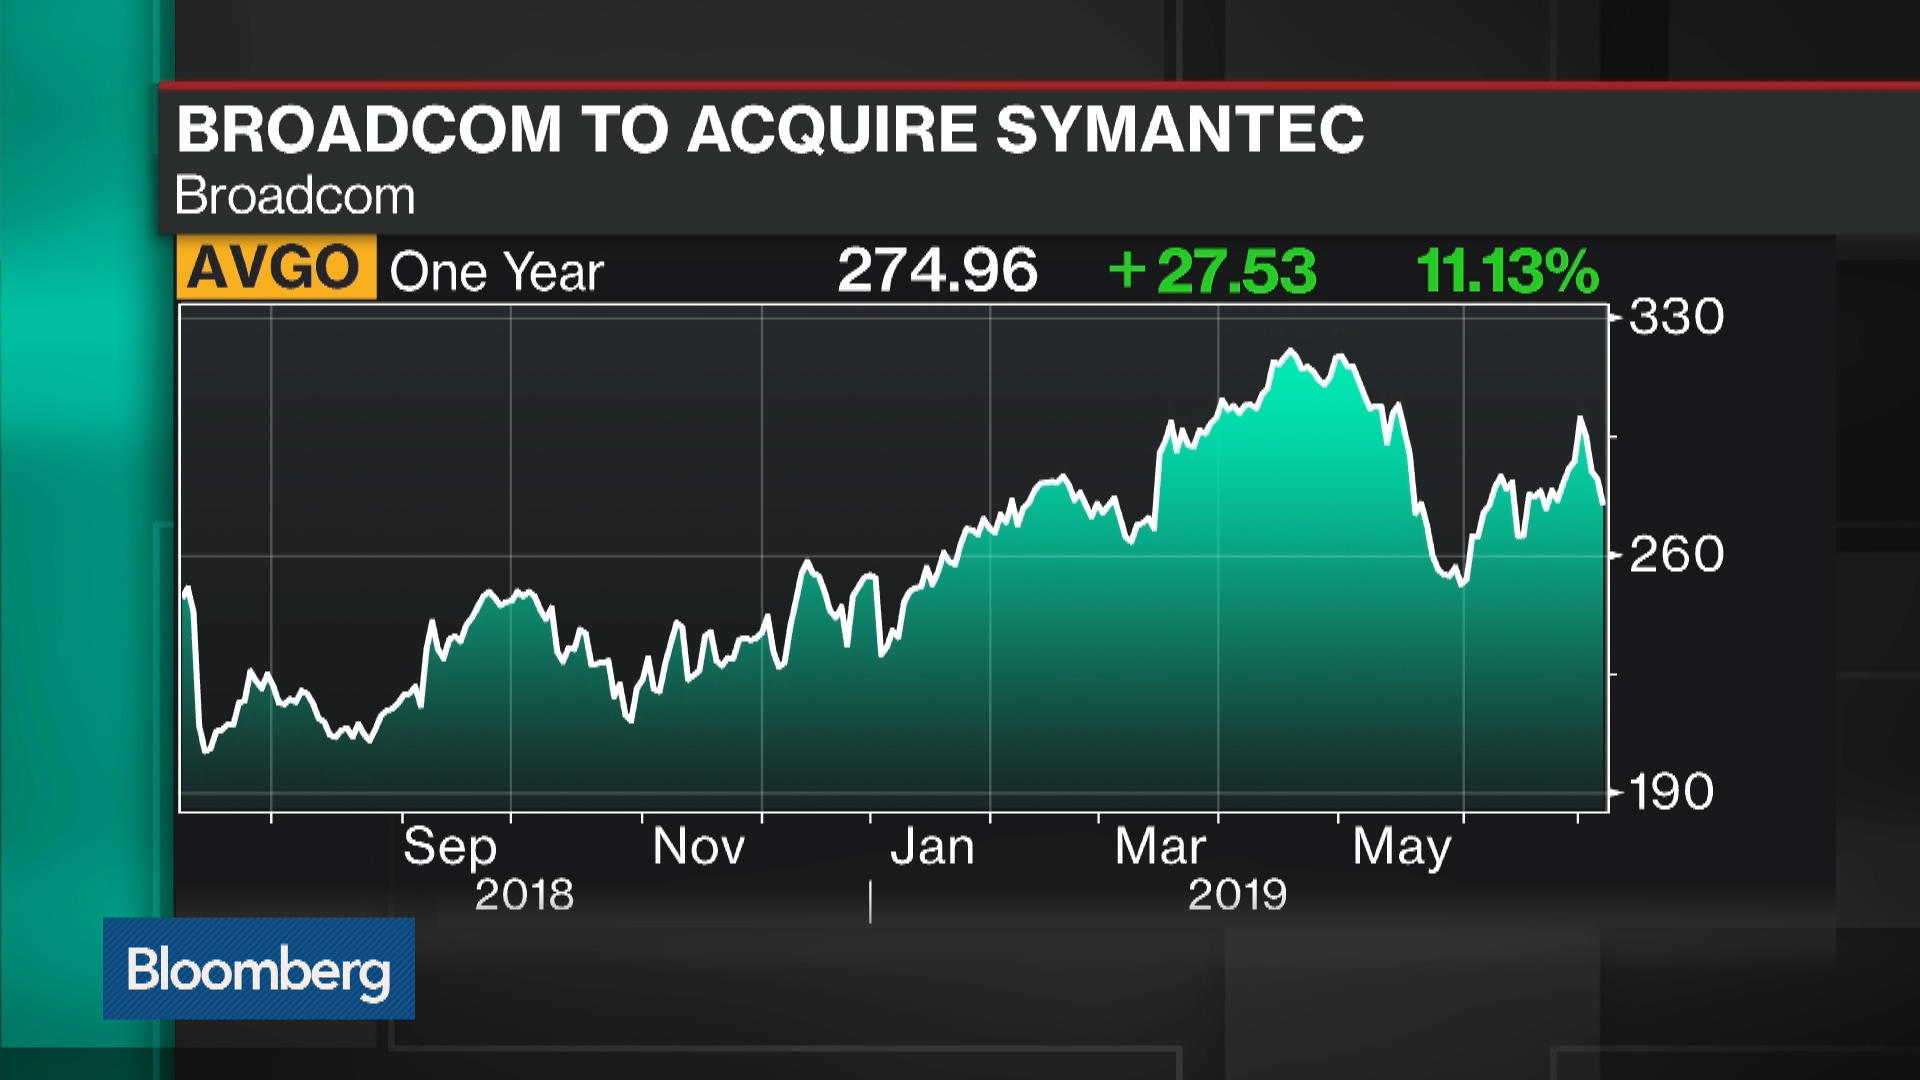 Moves Closer To Symantec Deal After Securing Financing